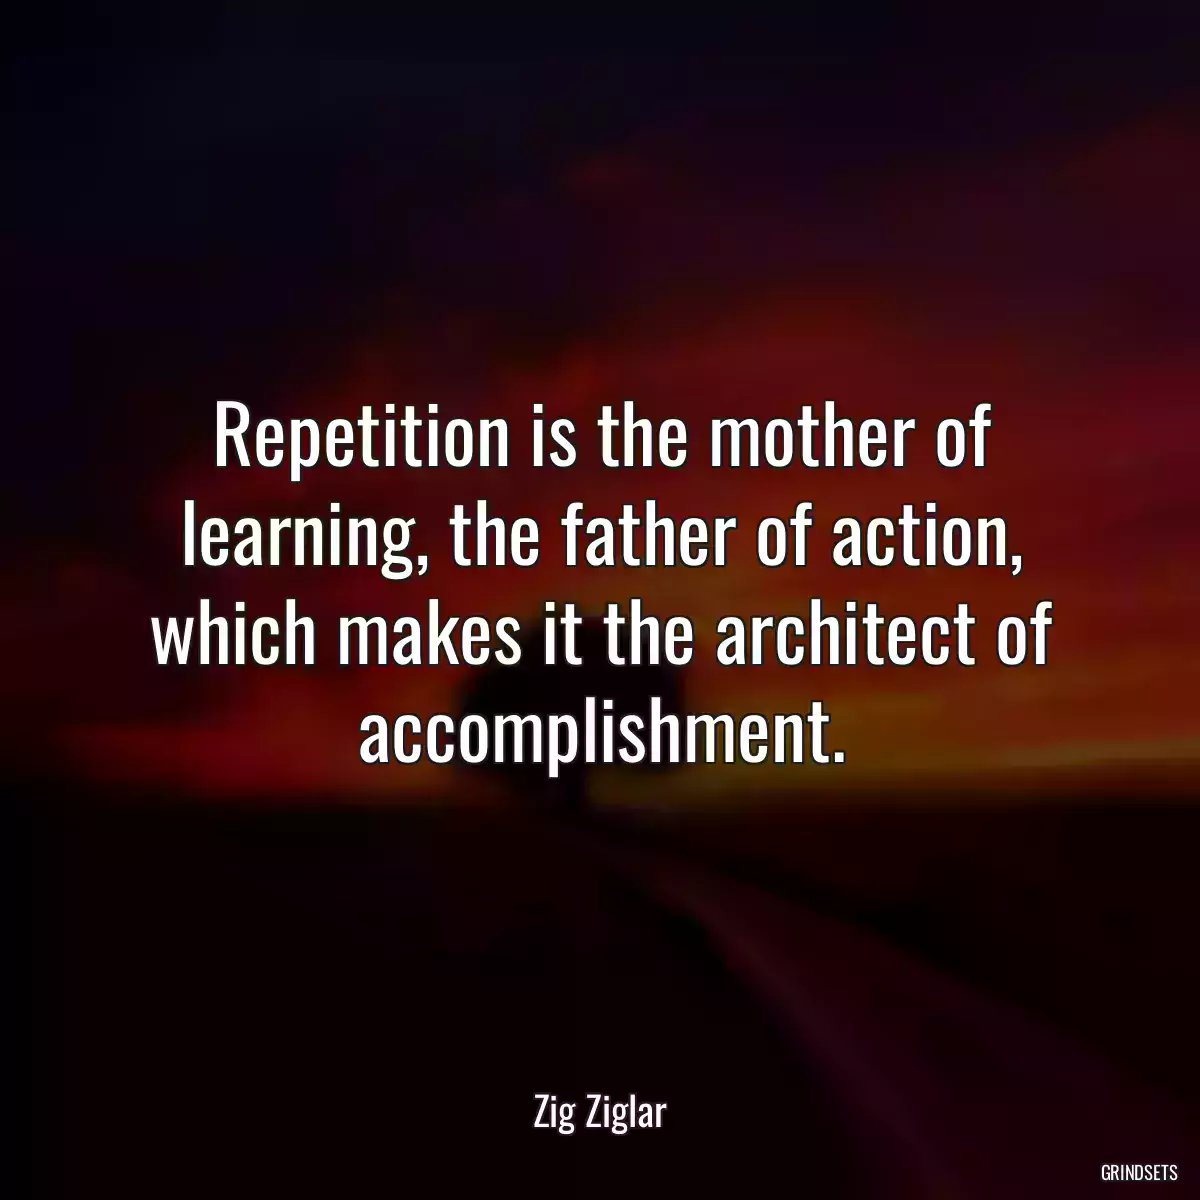 Repetition is the mother of learning, the father of action, which makes it the architect of accomplishment.